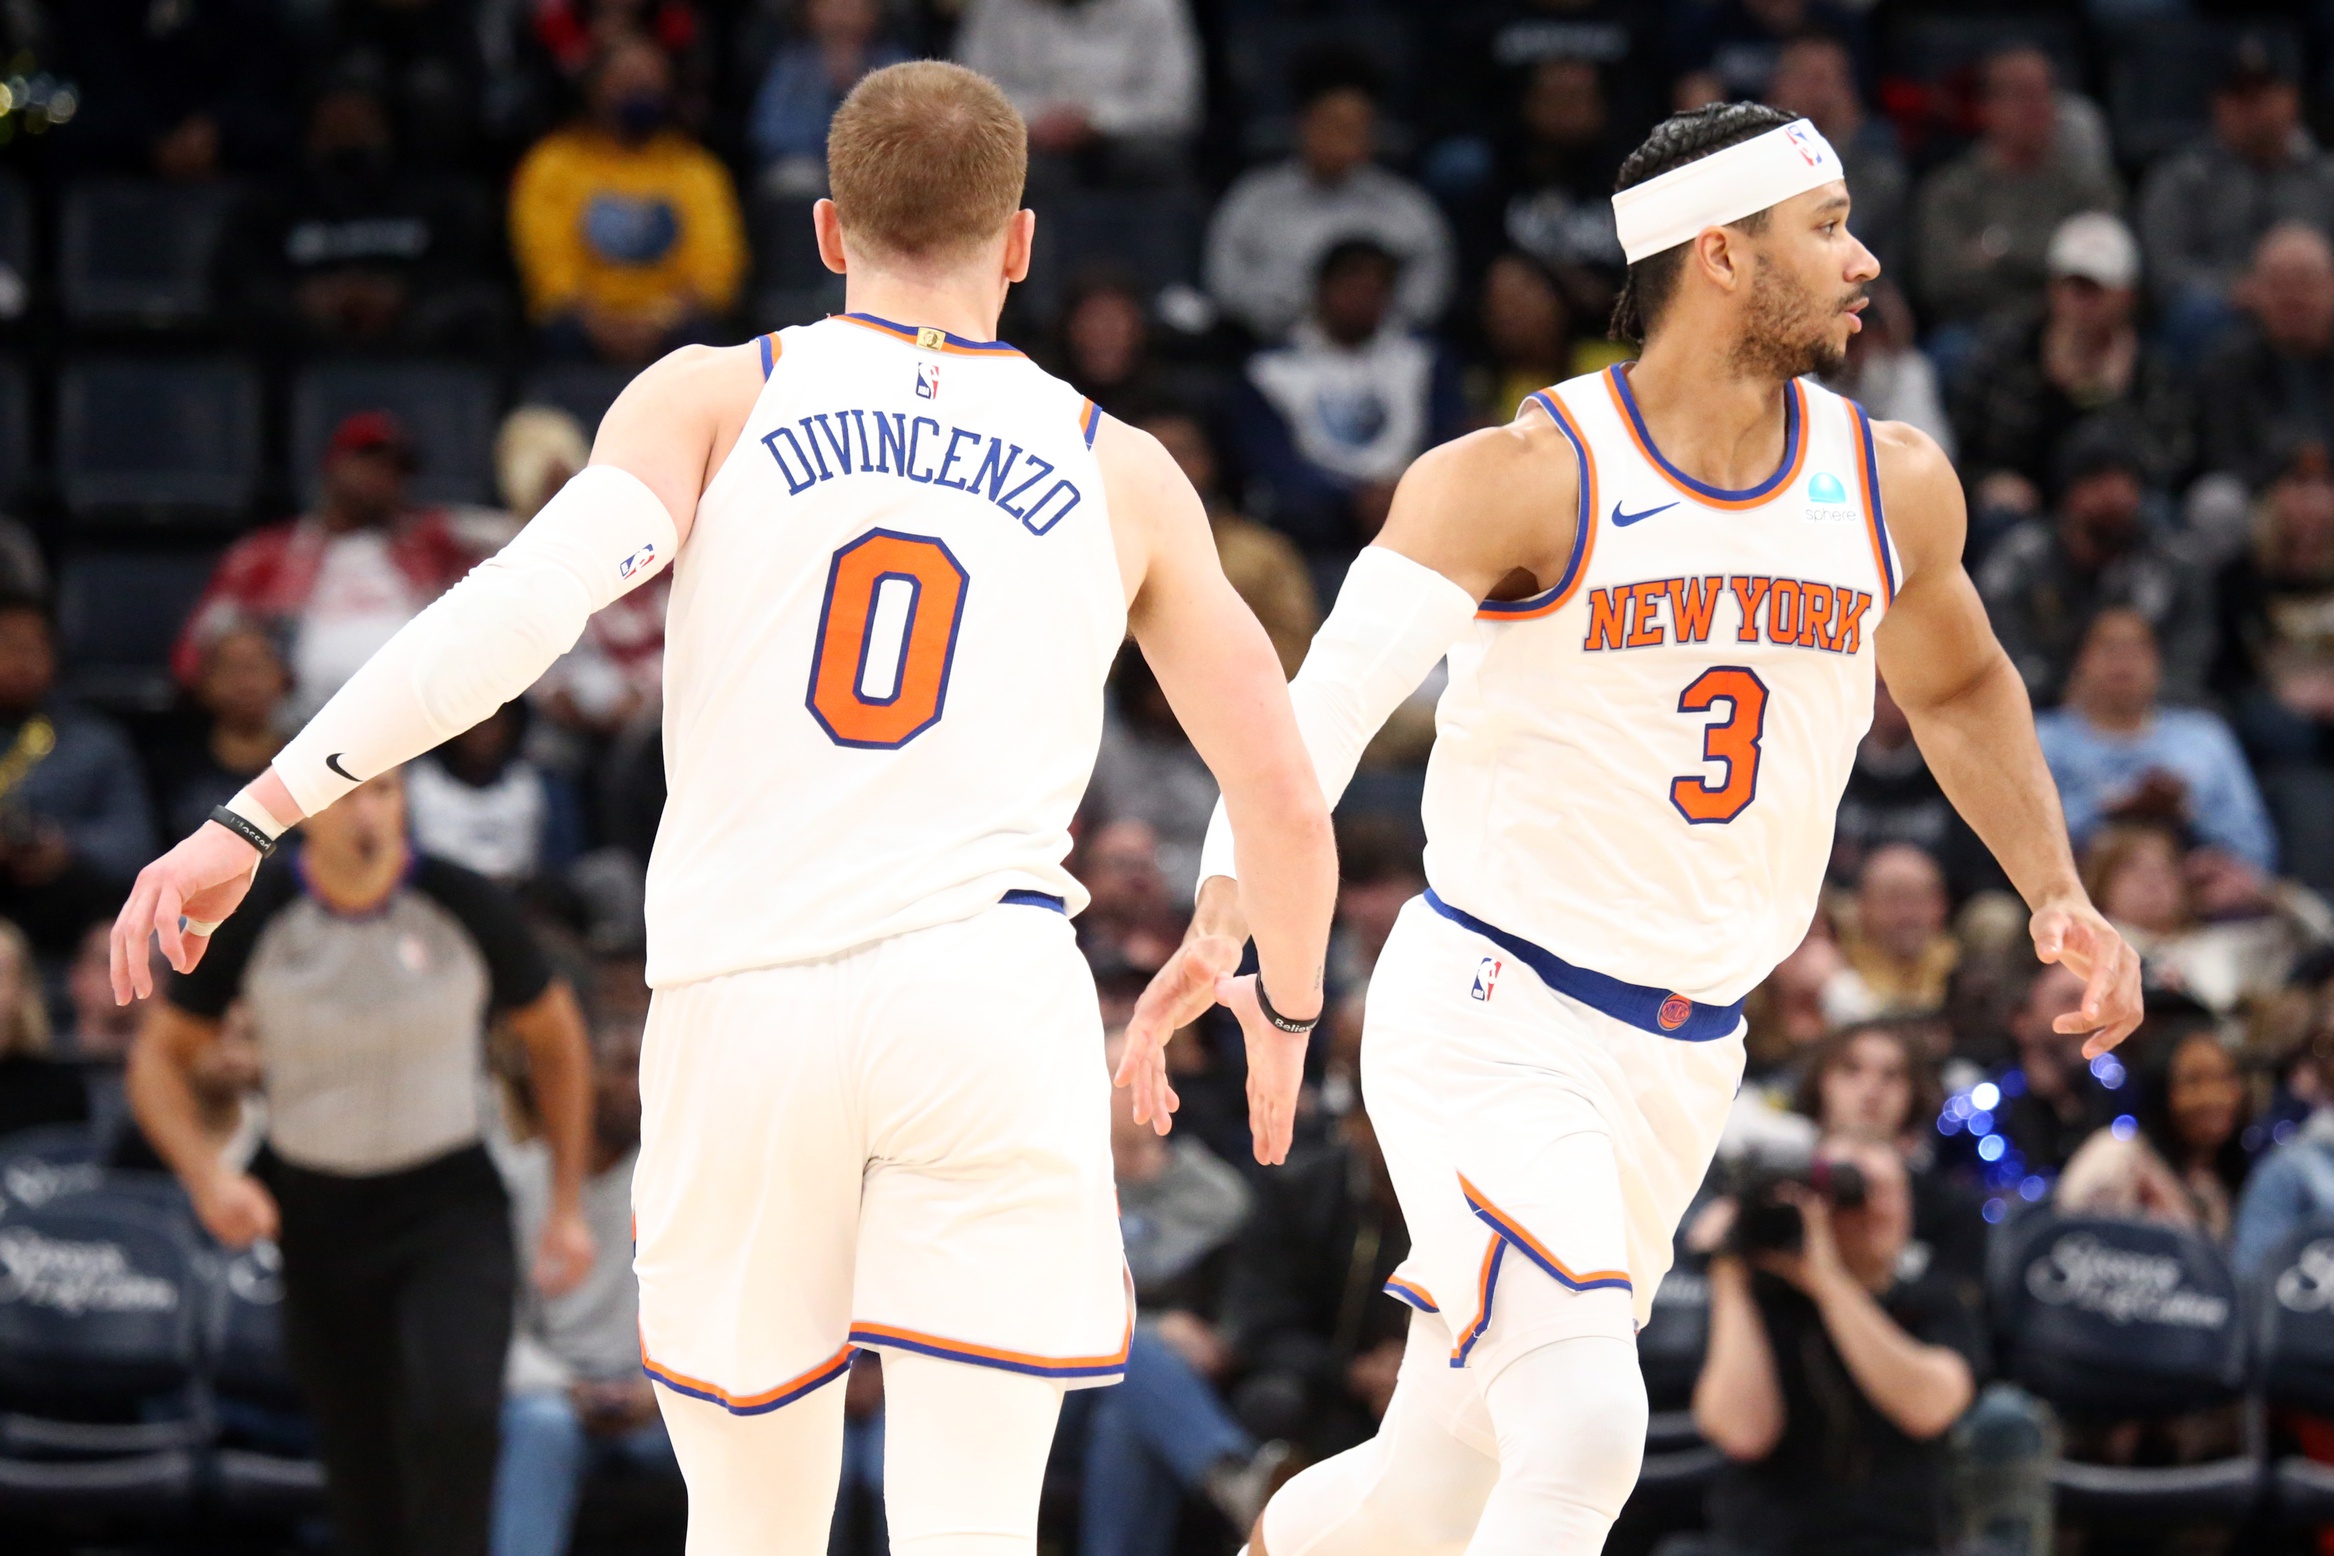 New York Knicks guard Josh Hart (3) react with guard Donte DiVincenzo (0) after a three point basket during the second half against the Memphis Grizzlies at FedExForum.